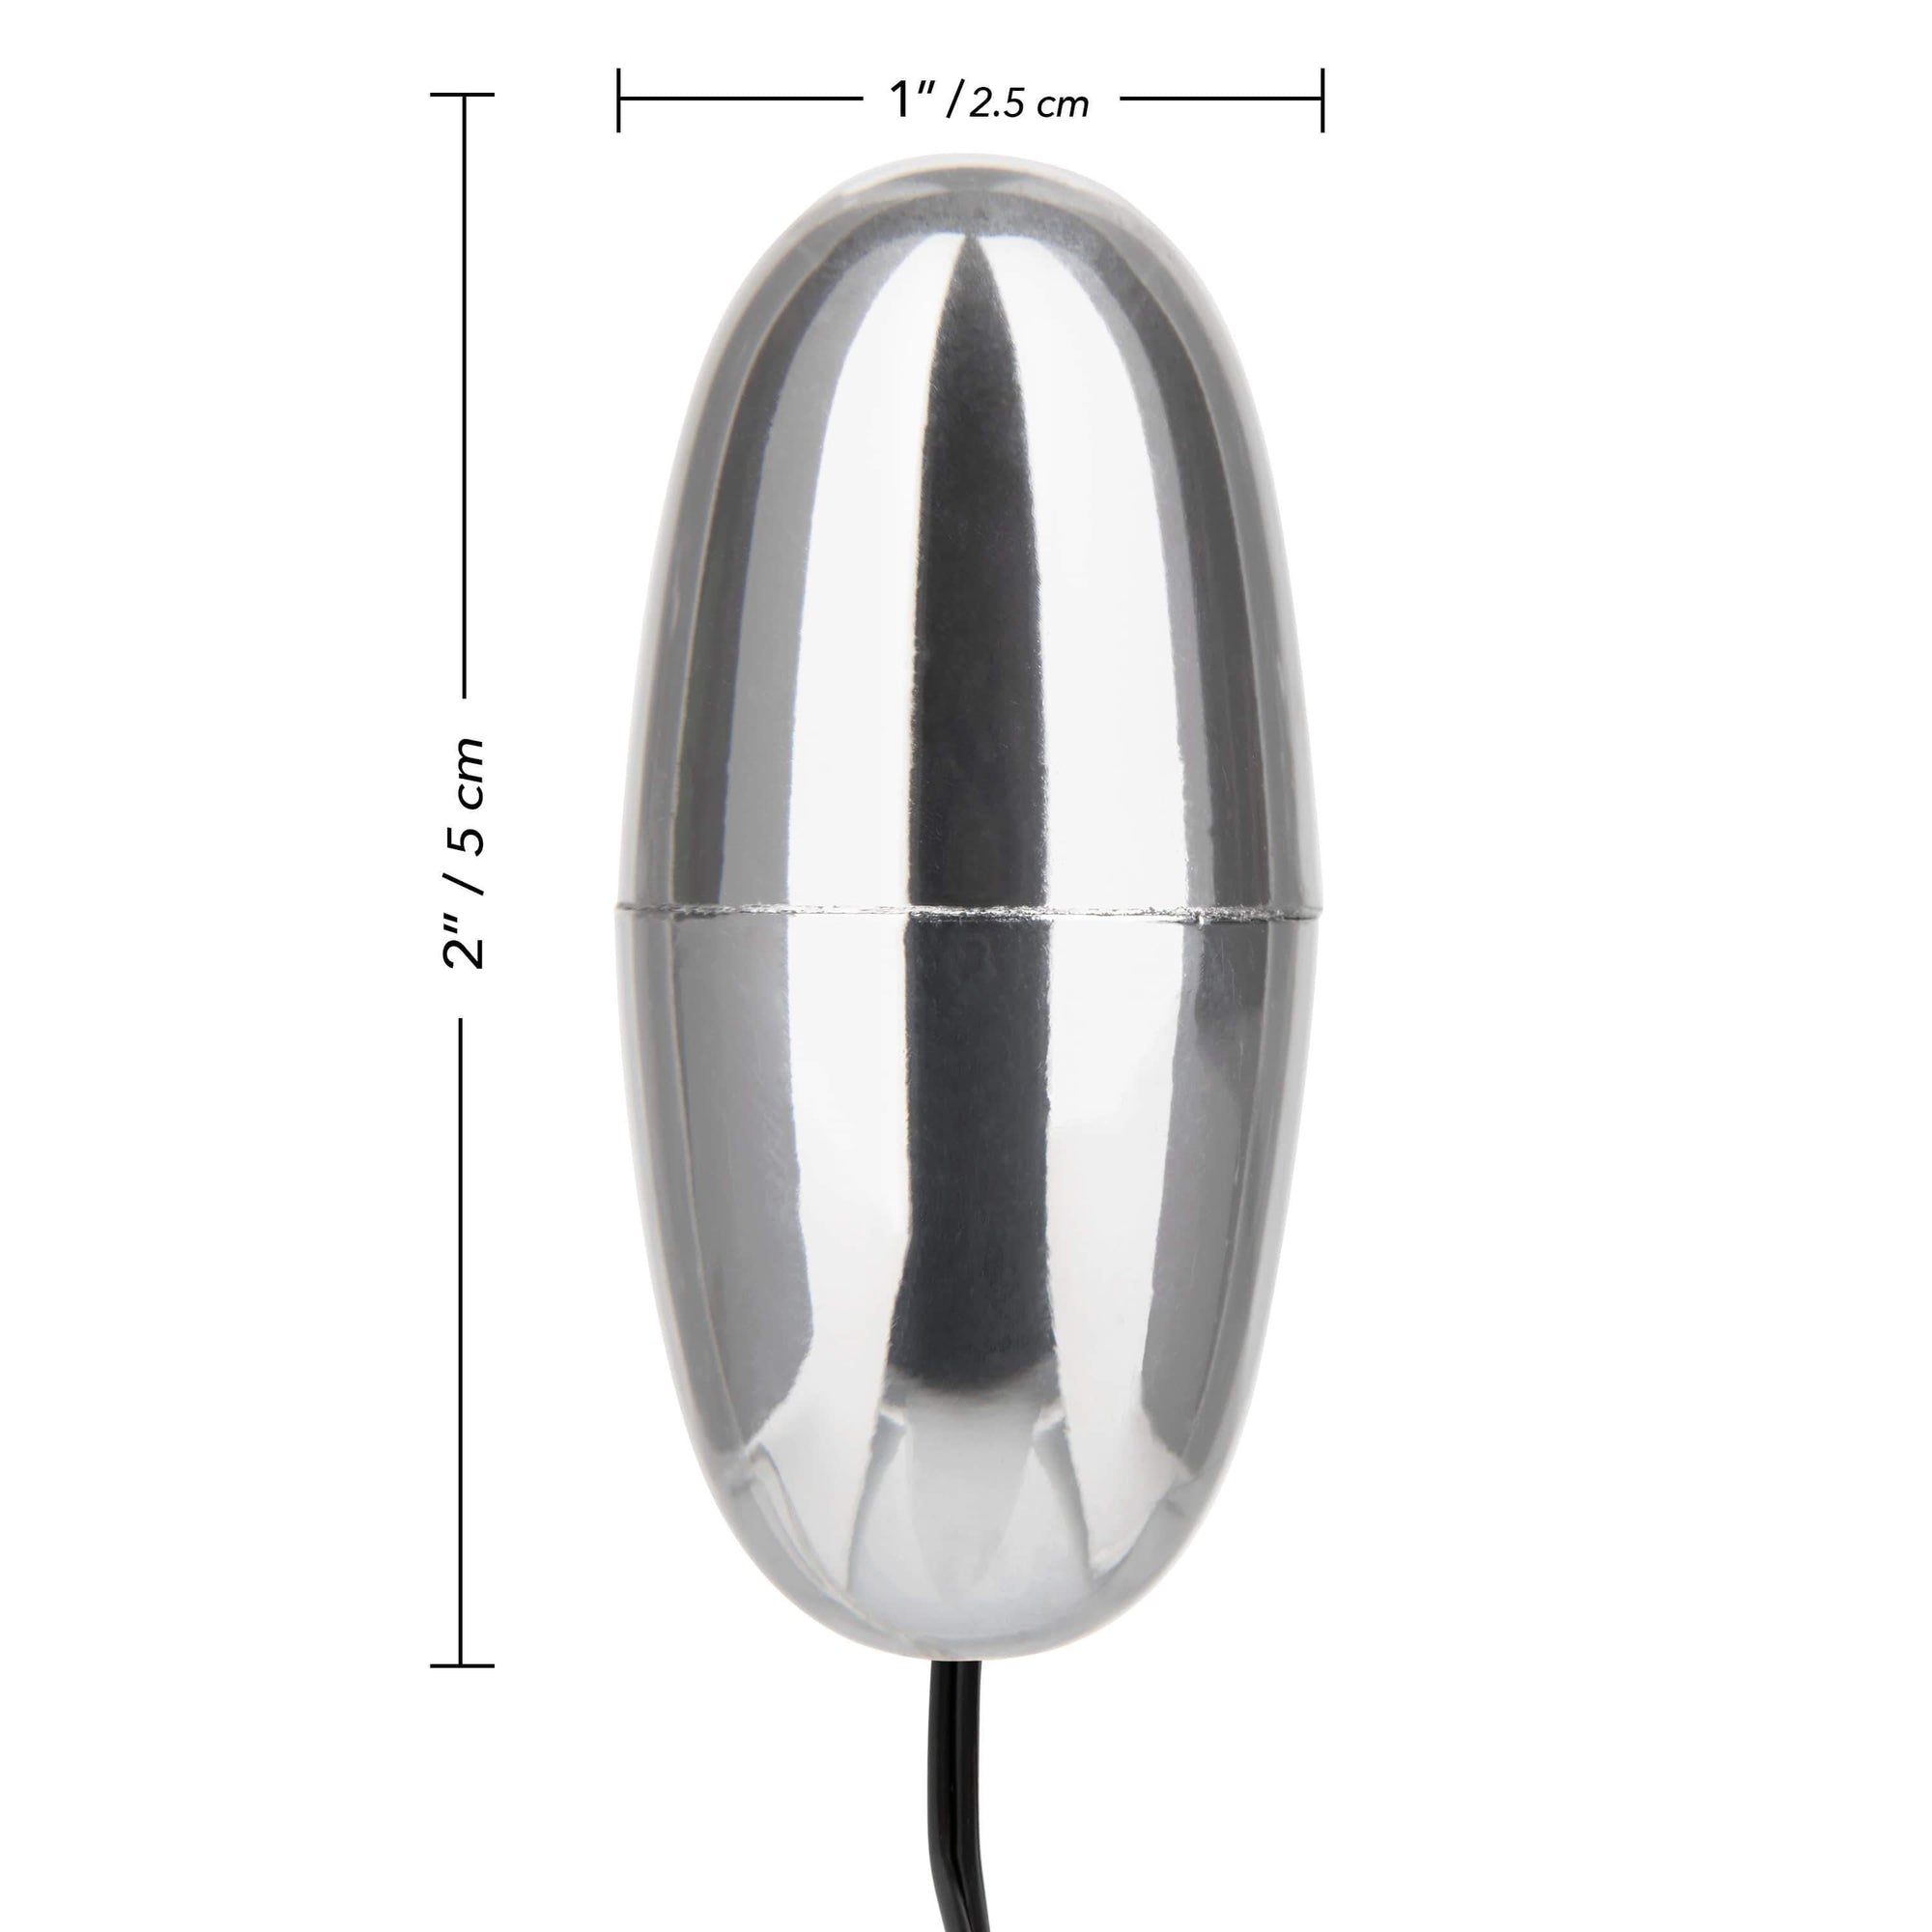 California Exotics - COLT Multi Speed Power Pak Bullet with Remote (Silver) Wired Remote Control Egg (Vibration) Non Rechargeable 716770032843 CherryAffairs